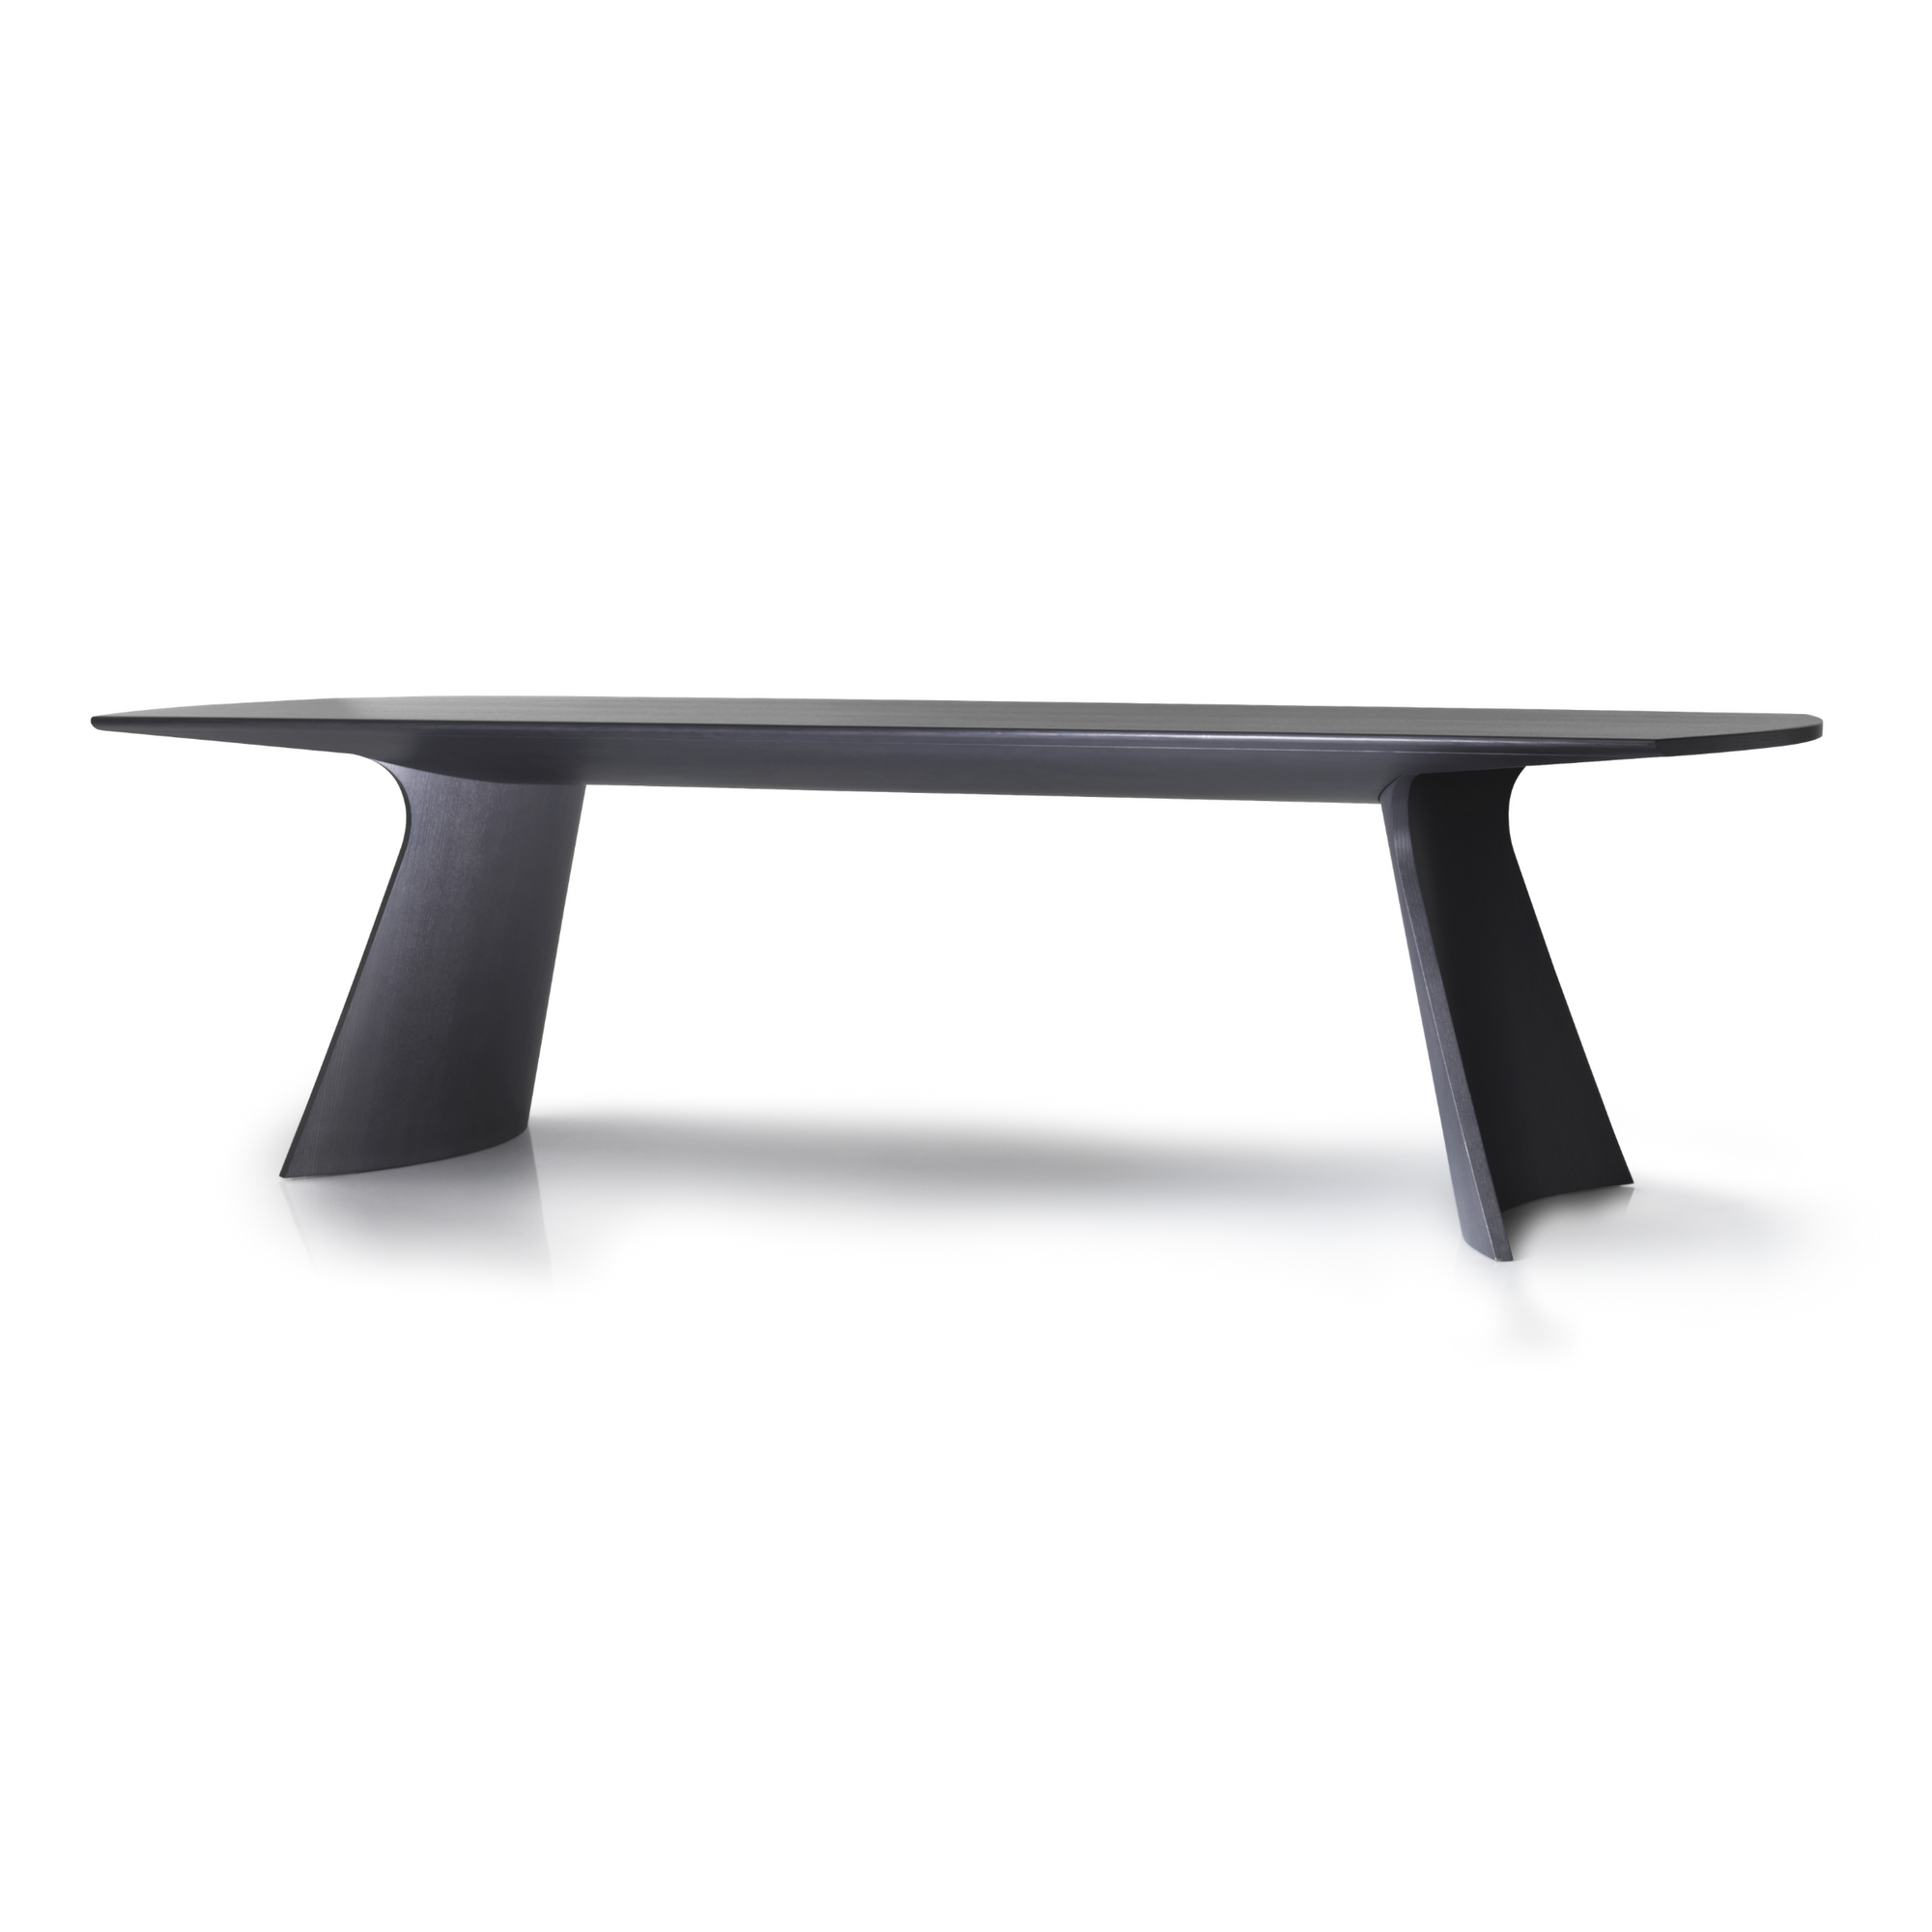 Minimal and elegant table with threedimentional shape. Structure and top in ashwood painted open pore.